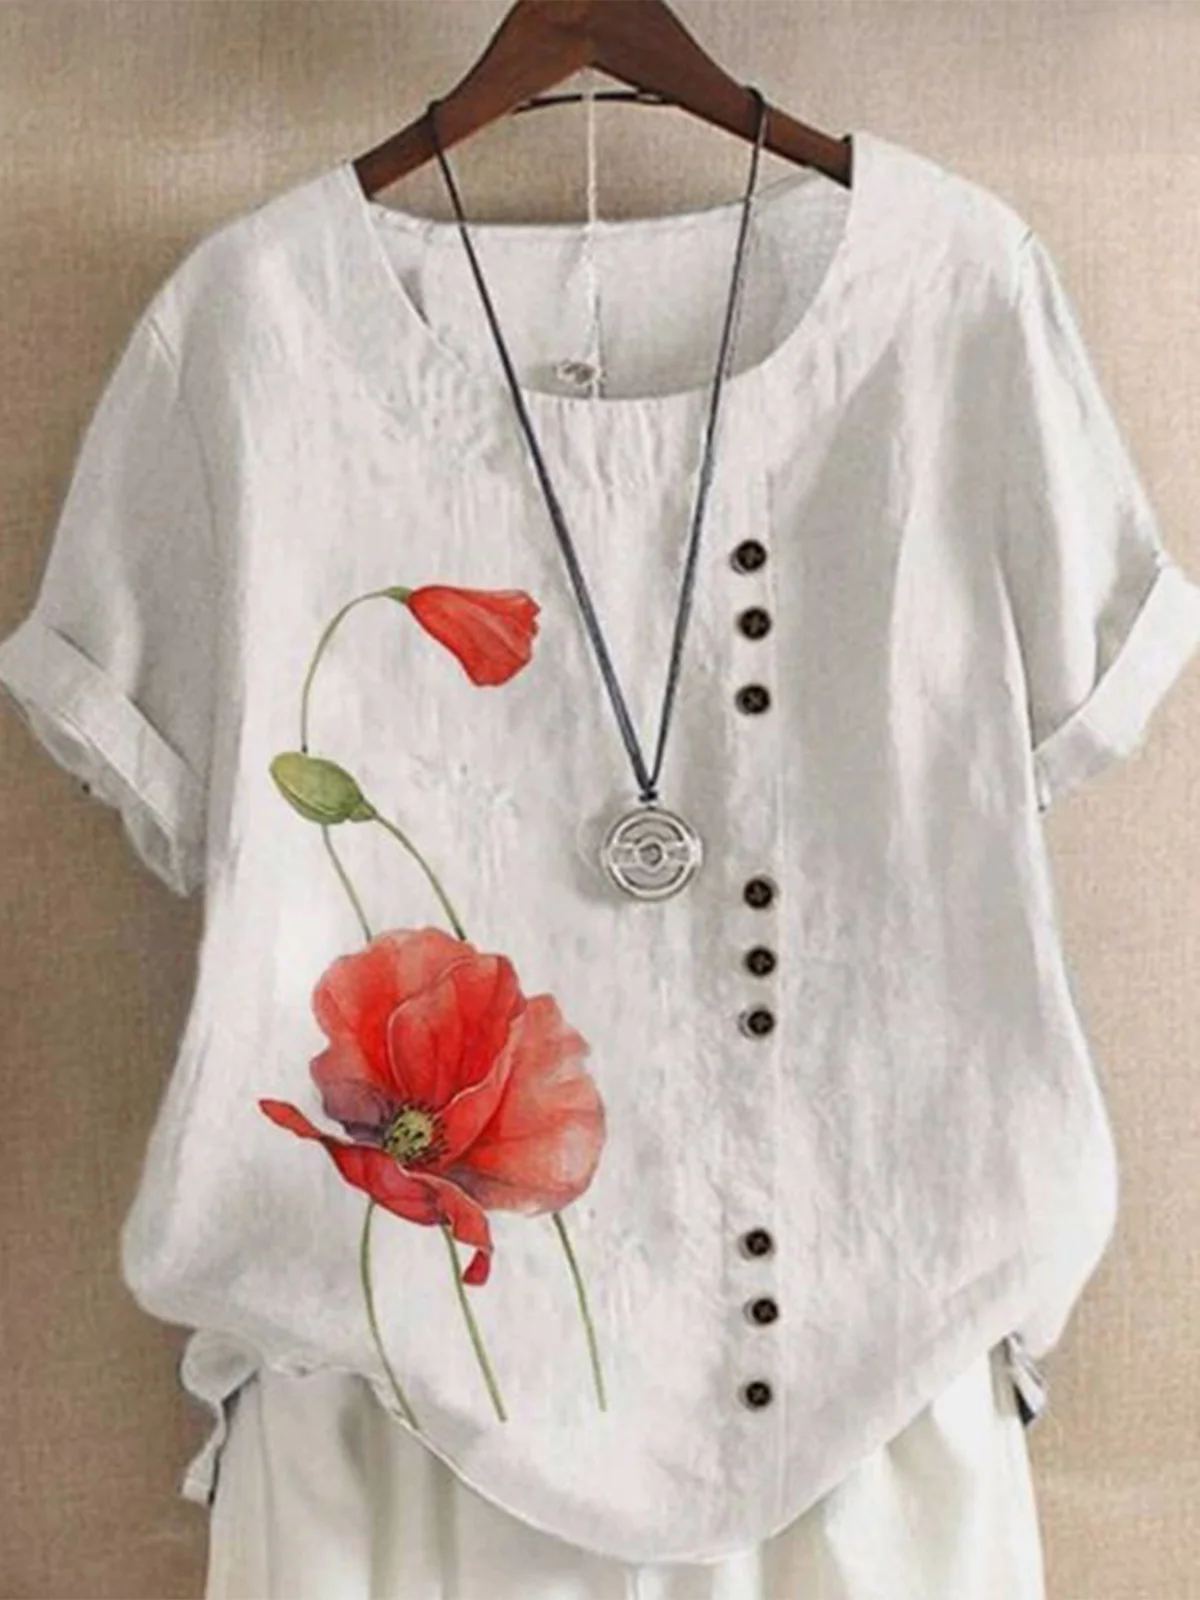 Crew Neck Floral Casual Cotton Buttoned Shirt | justfashionnow